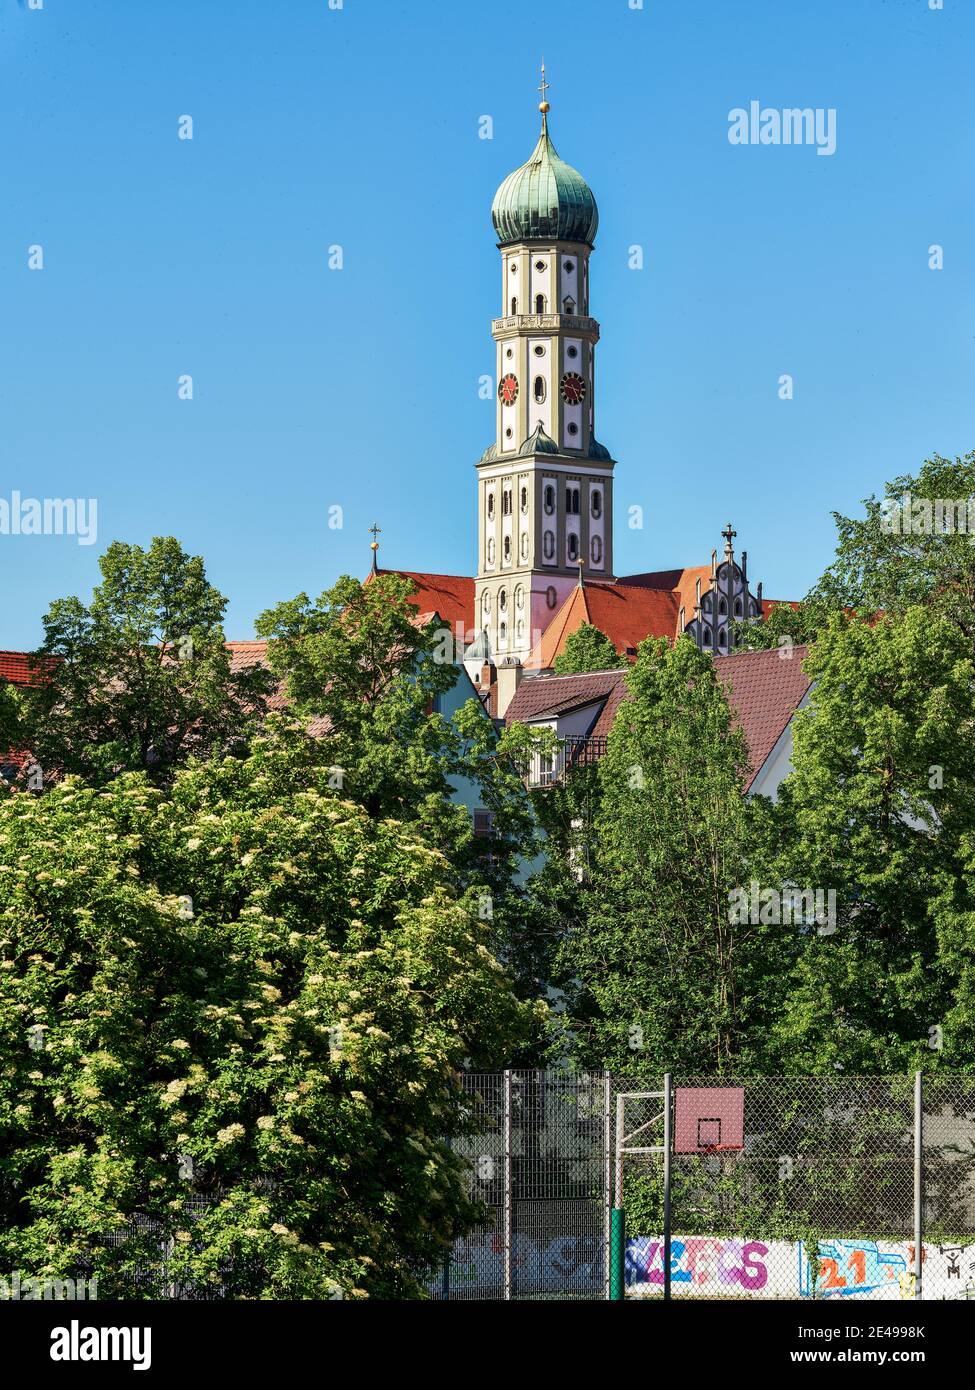 Basilica, Catholic church, church, steeple, tower, trees, ditch, Lech Canal, canal, place of worship, place of interest, historical place of interest, historical old town, old town Stock Photo